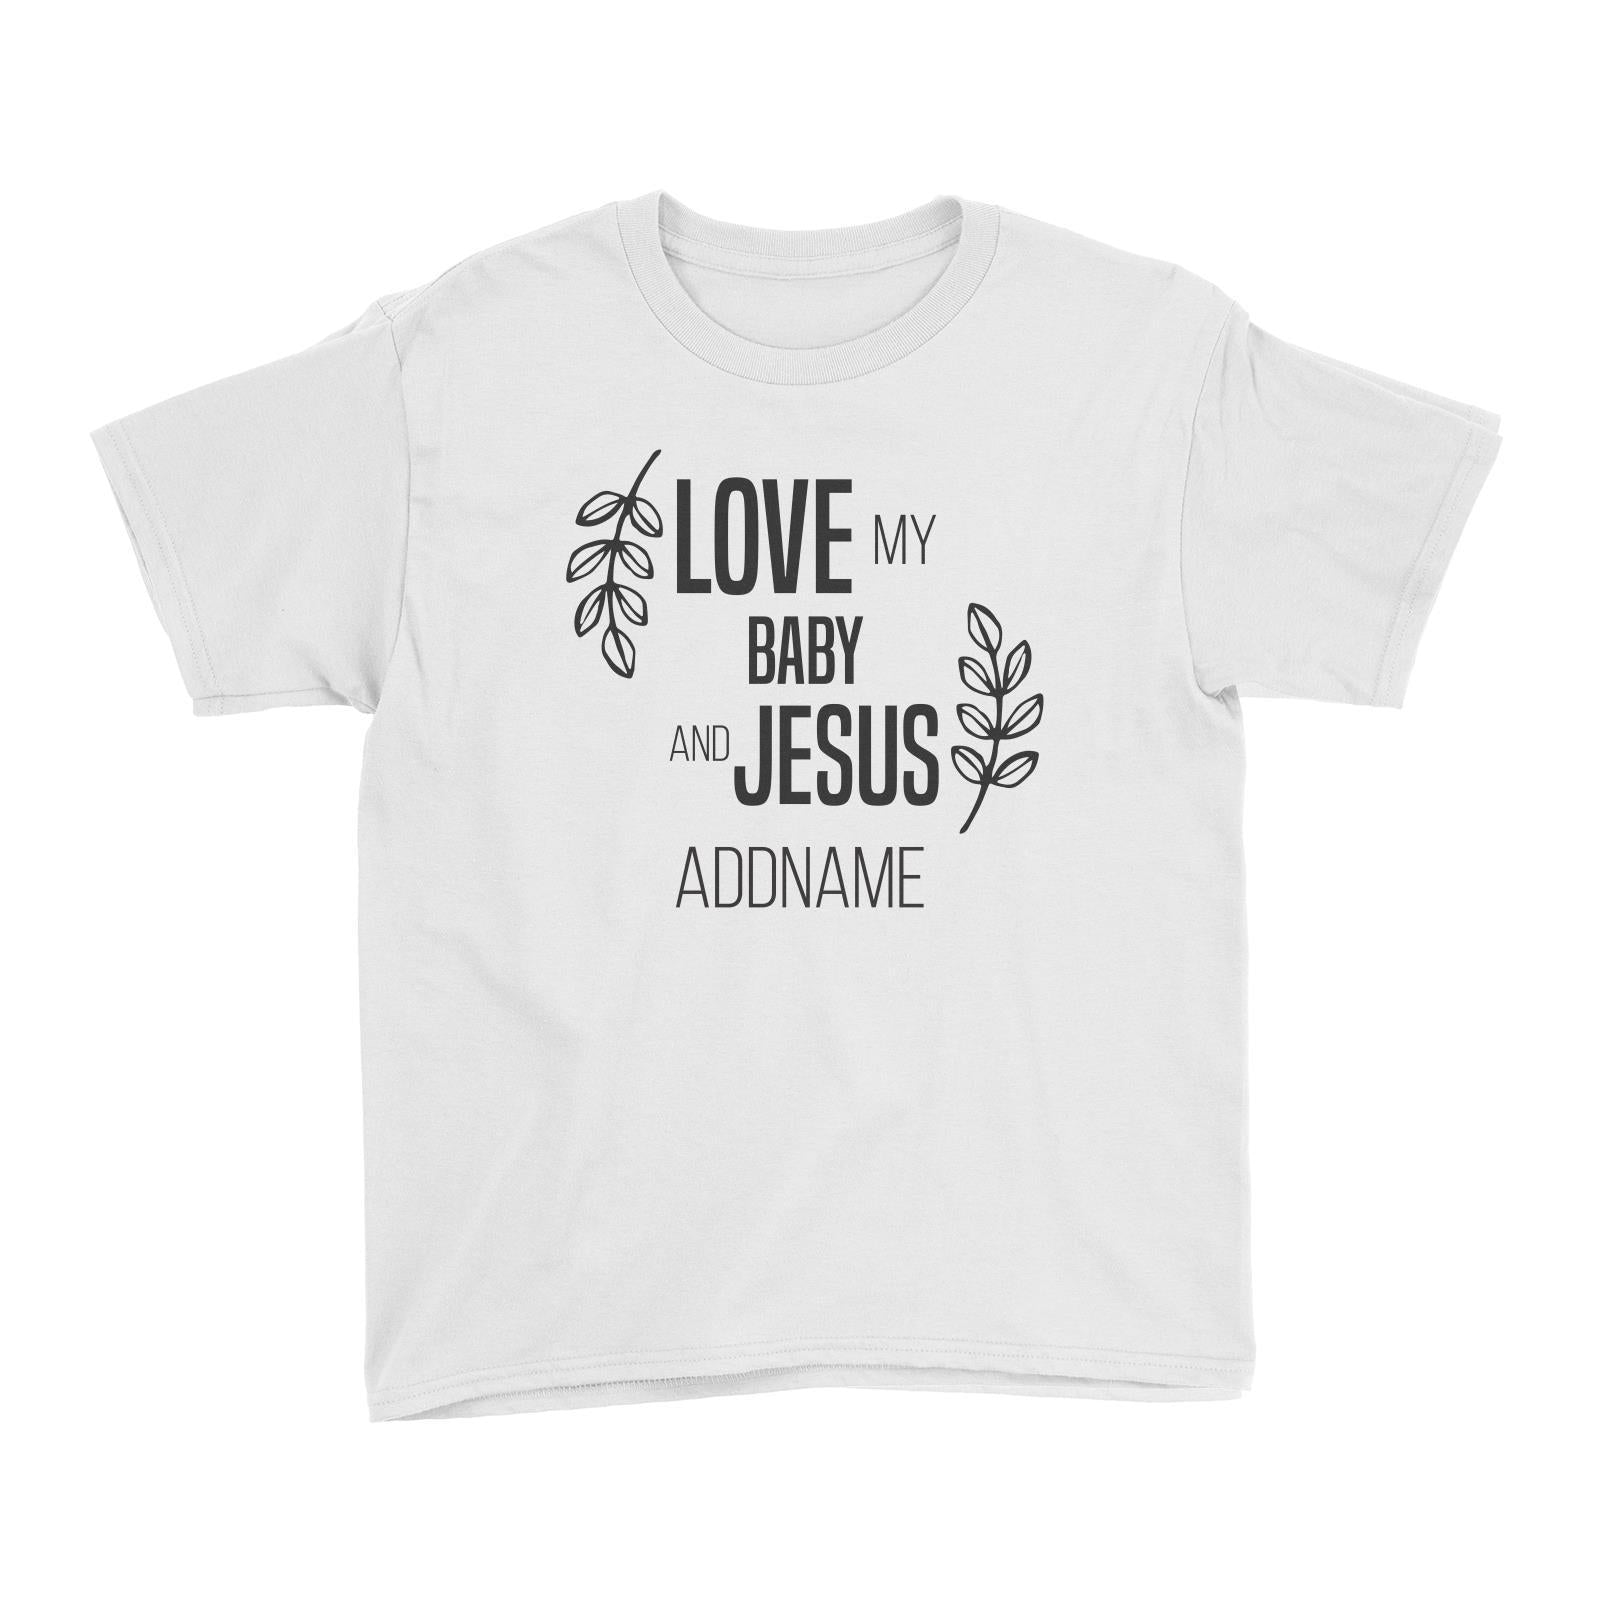 Christian Series Love My Baby And Jesus Addname Kid's T-Shirt